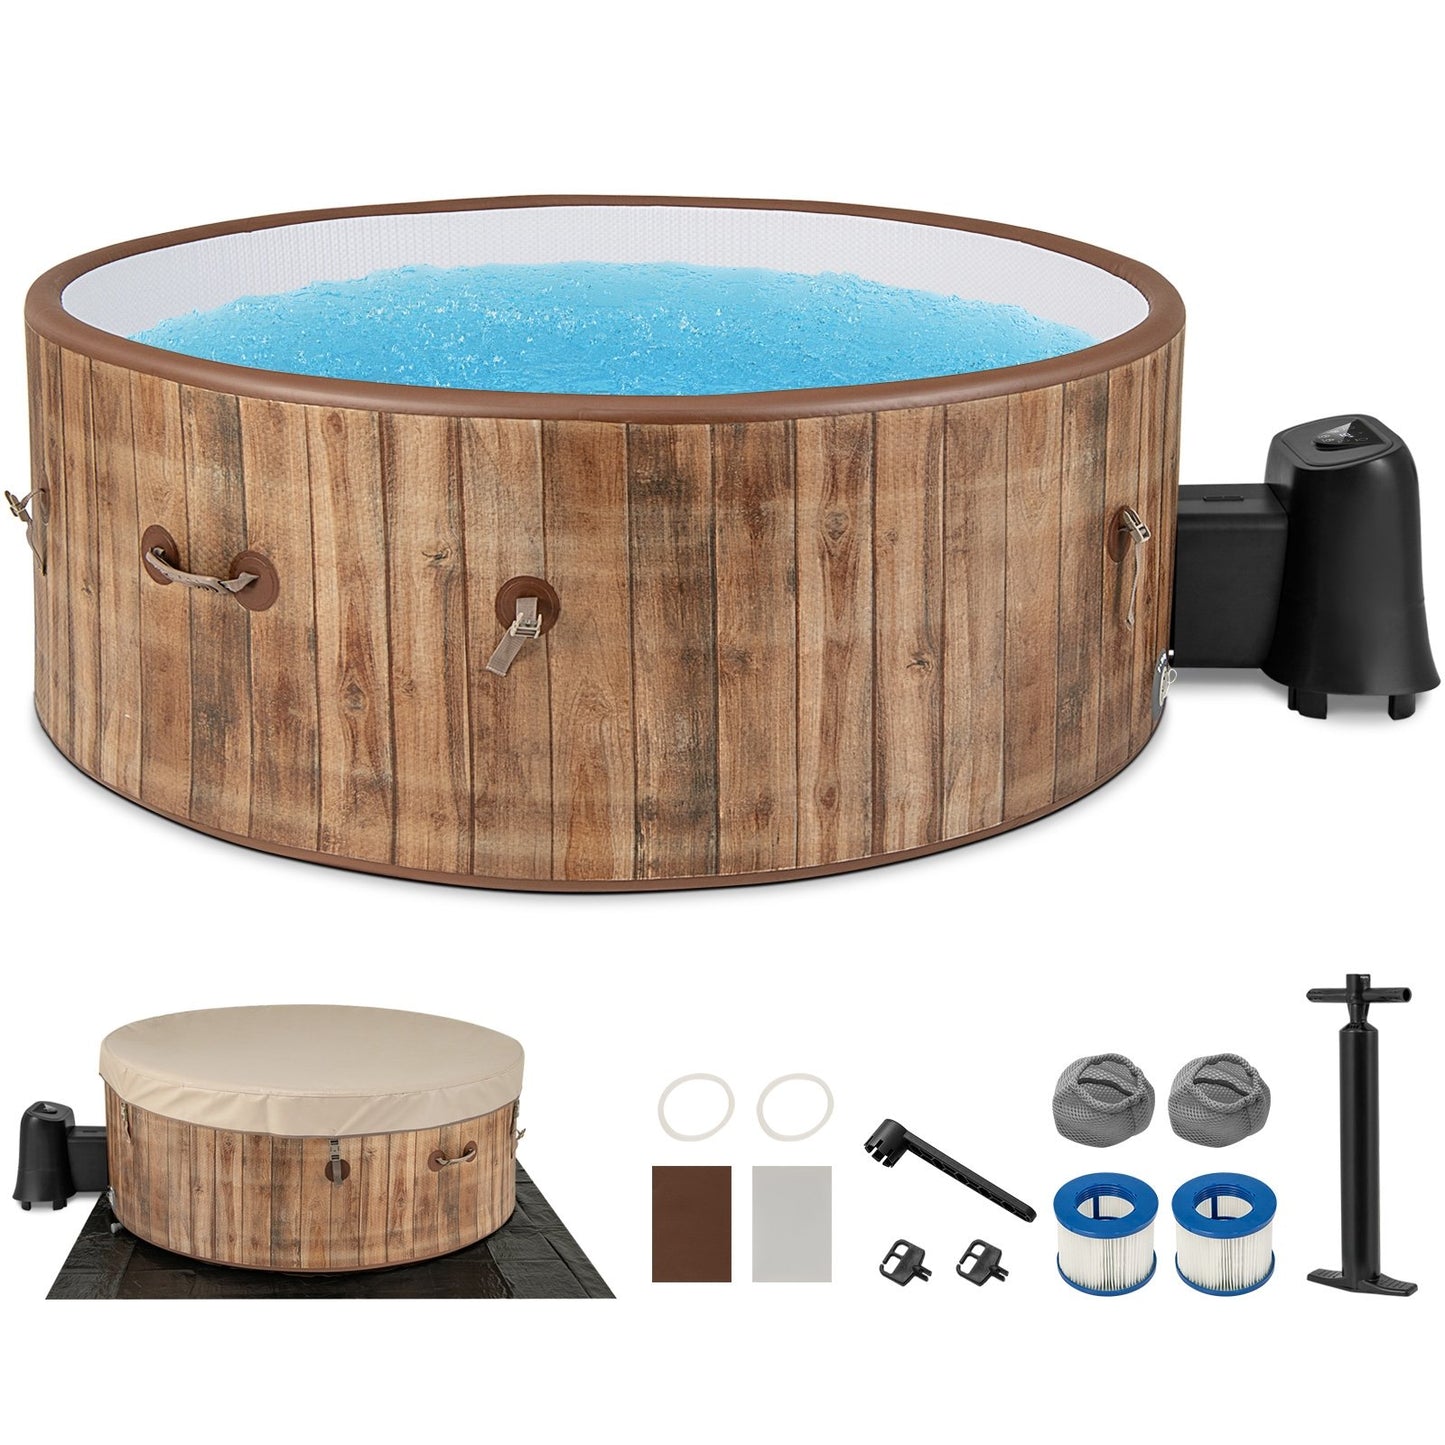 72 Inches Inflatable Hot Tub SPA with 120 Air Jets Electric Heater Pump for 4-6 Person, Coffee